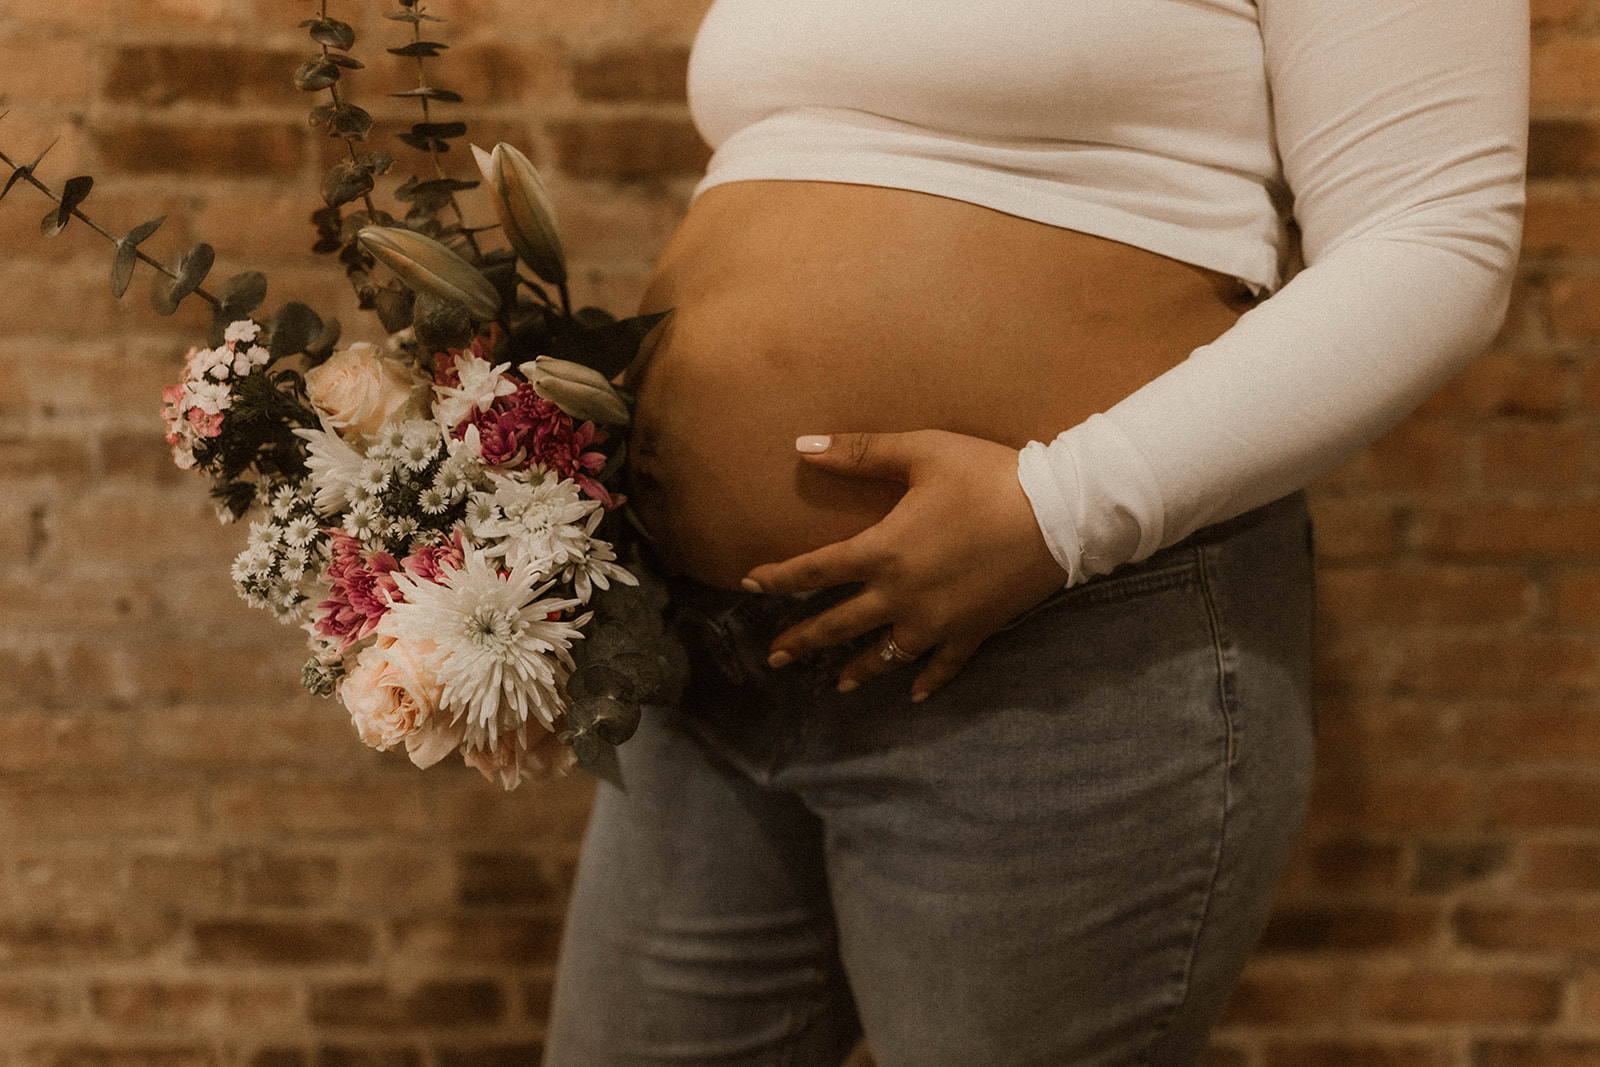 Maternity session with baby bump and flowers